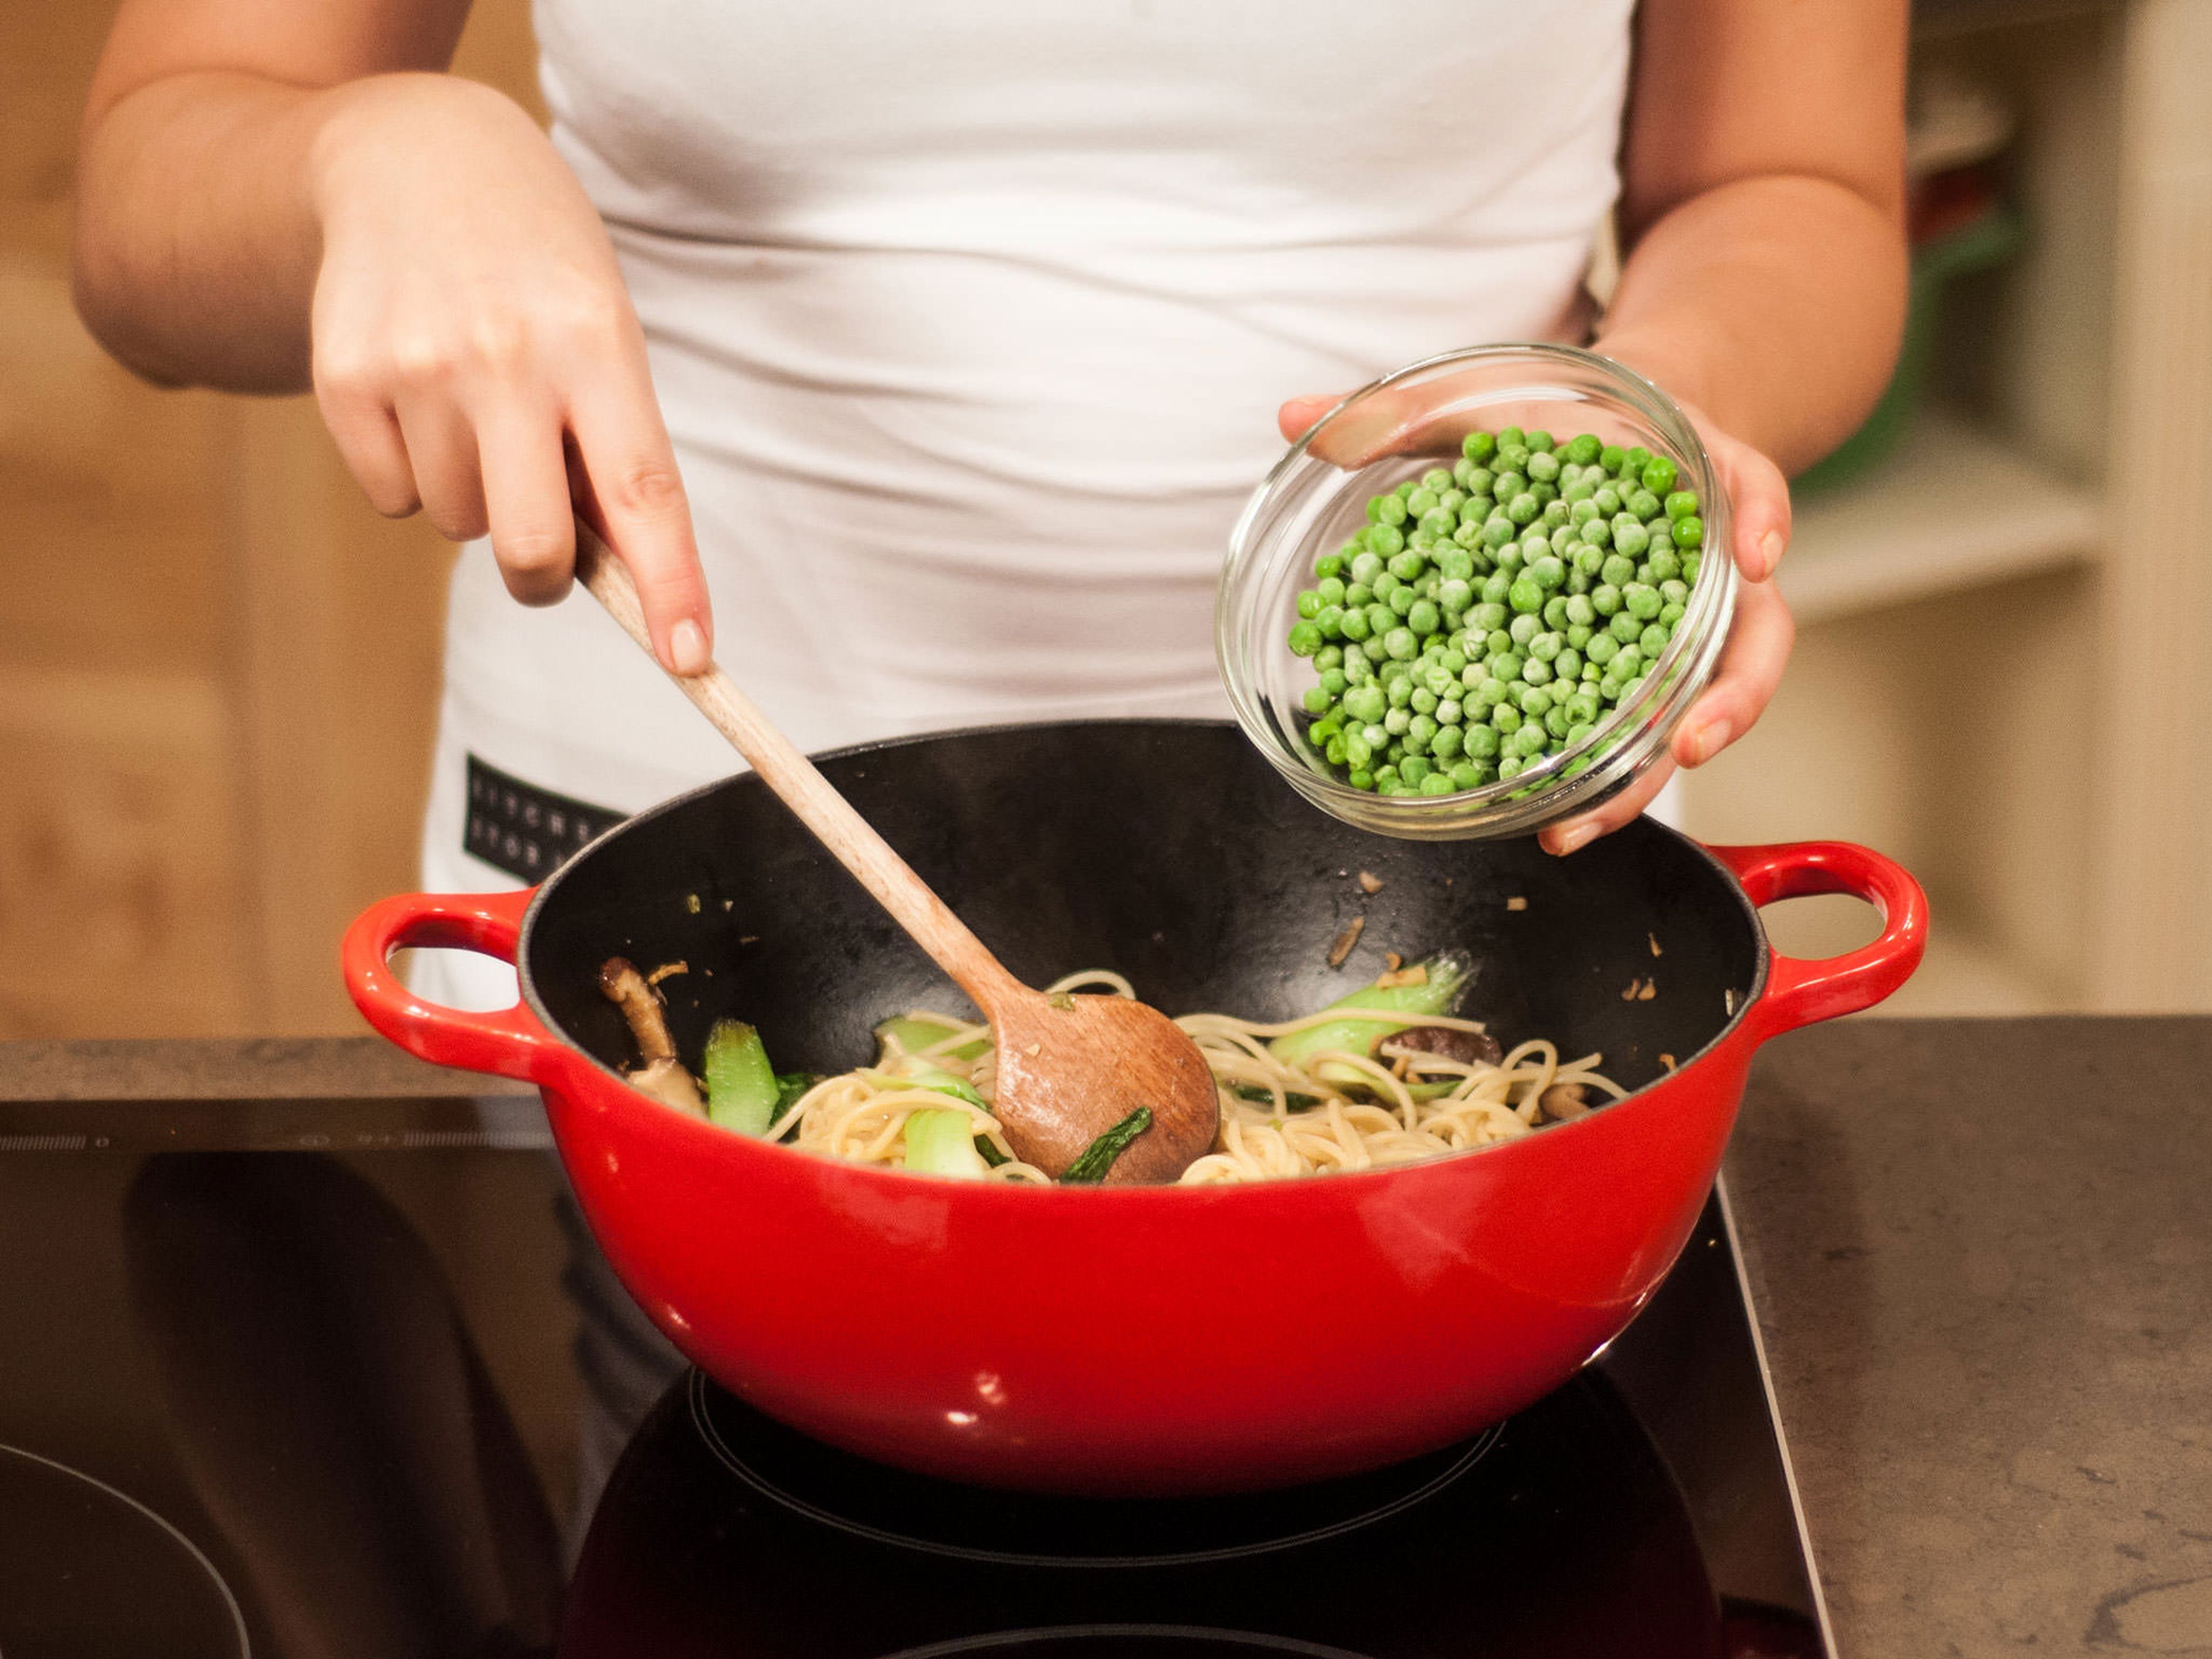 Return noodles to pan. Add sesame oil and peas to pan. Continue to sauté for approx. 4 – 6 min., stirring well to combine. Season to taste once more with salt and pepper. Enjoy as a healthy lunch!